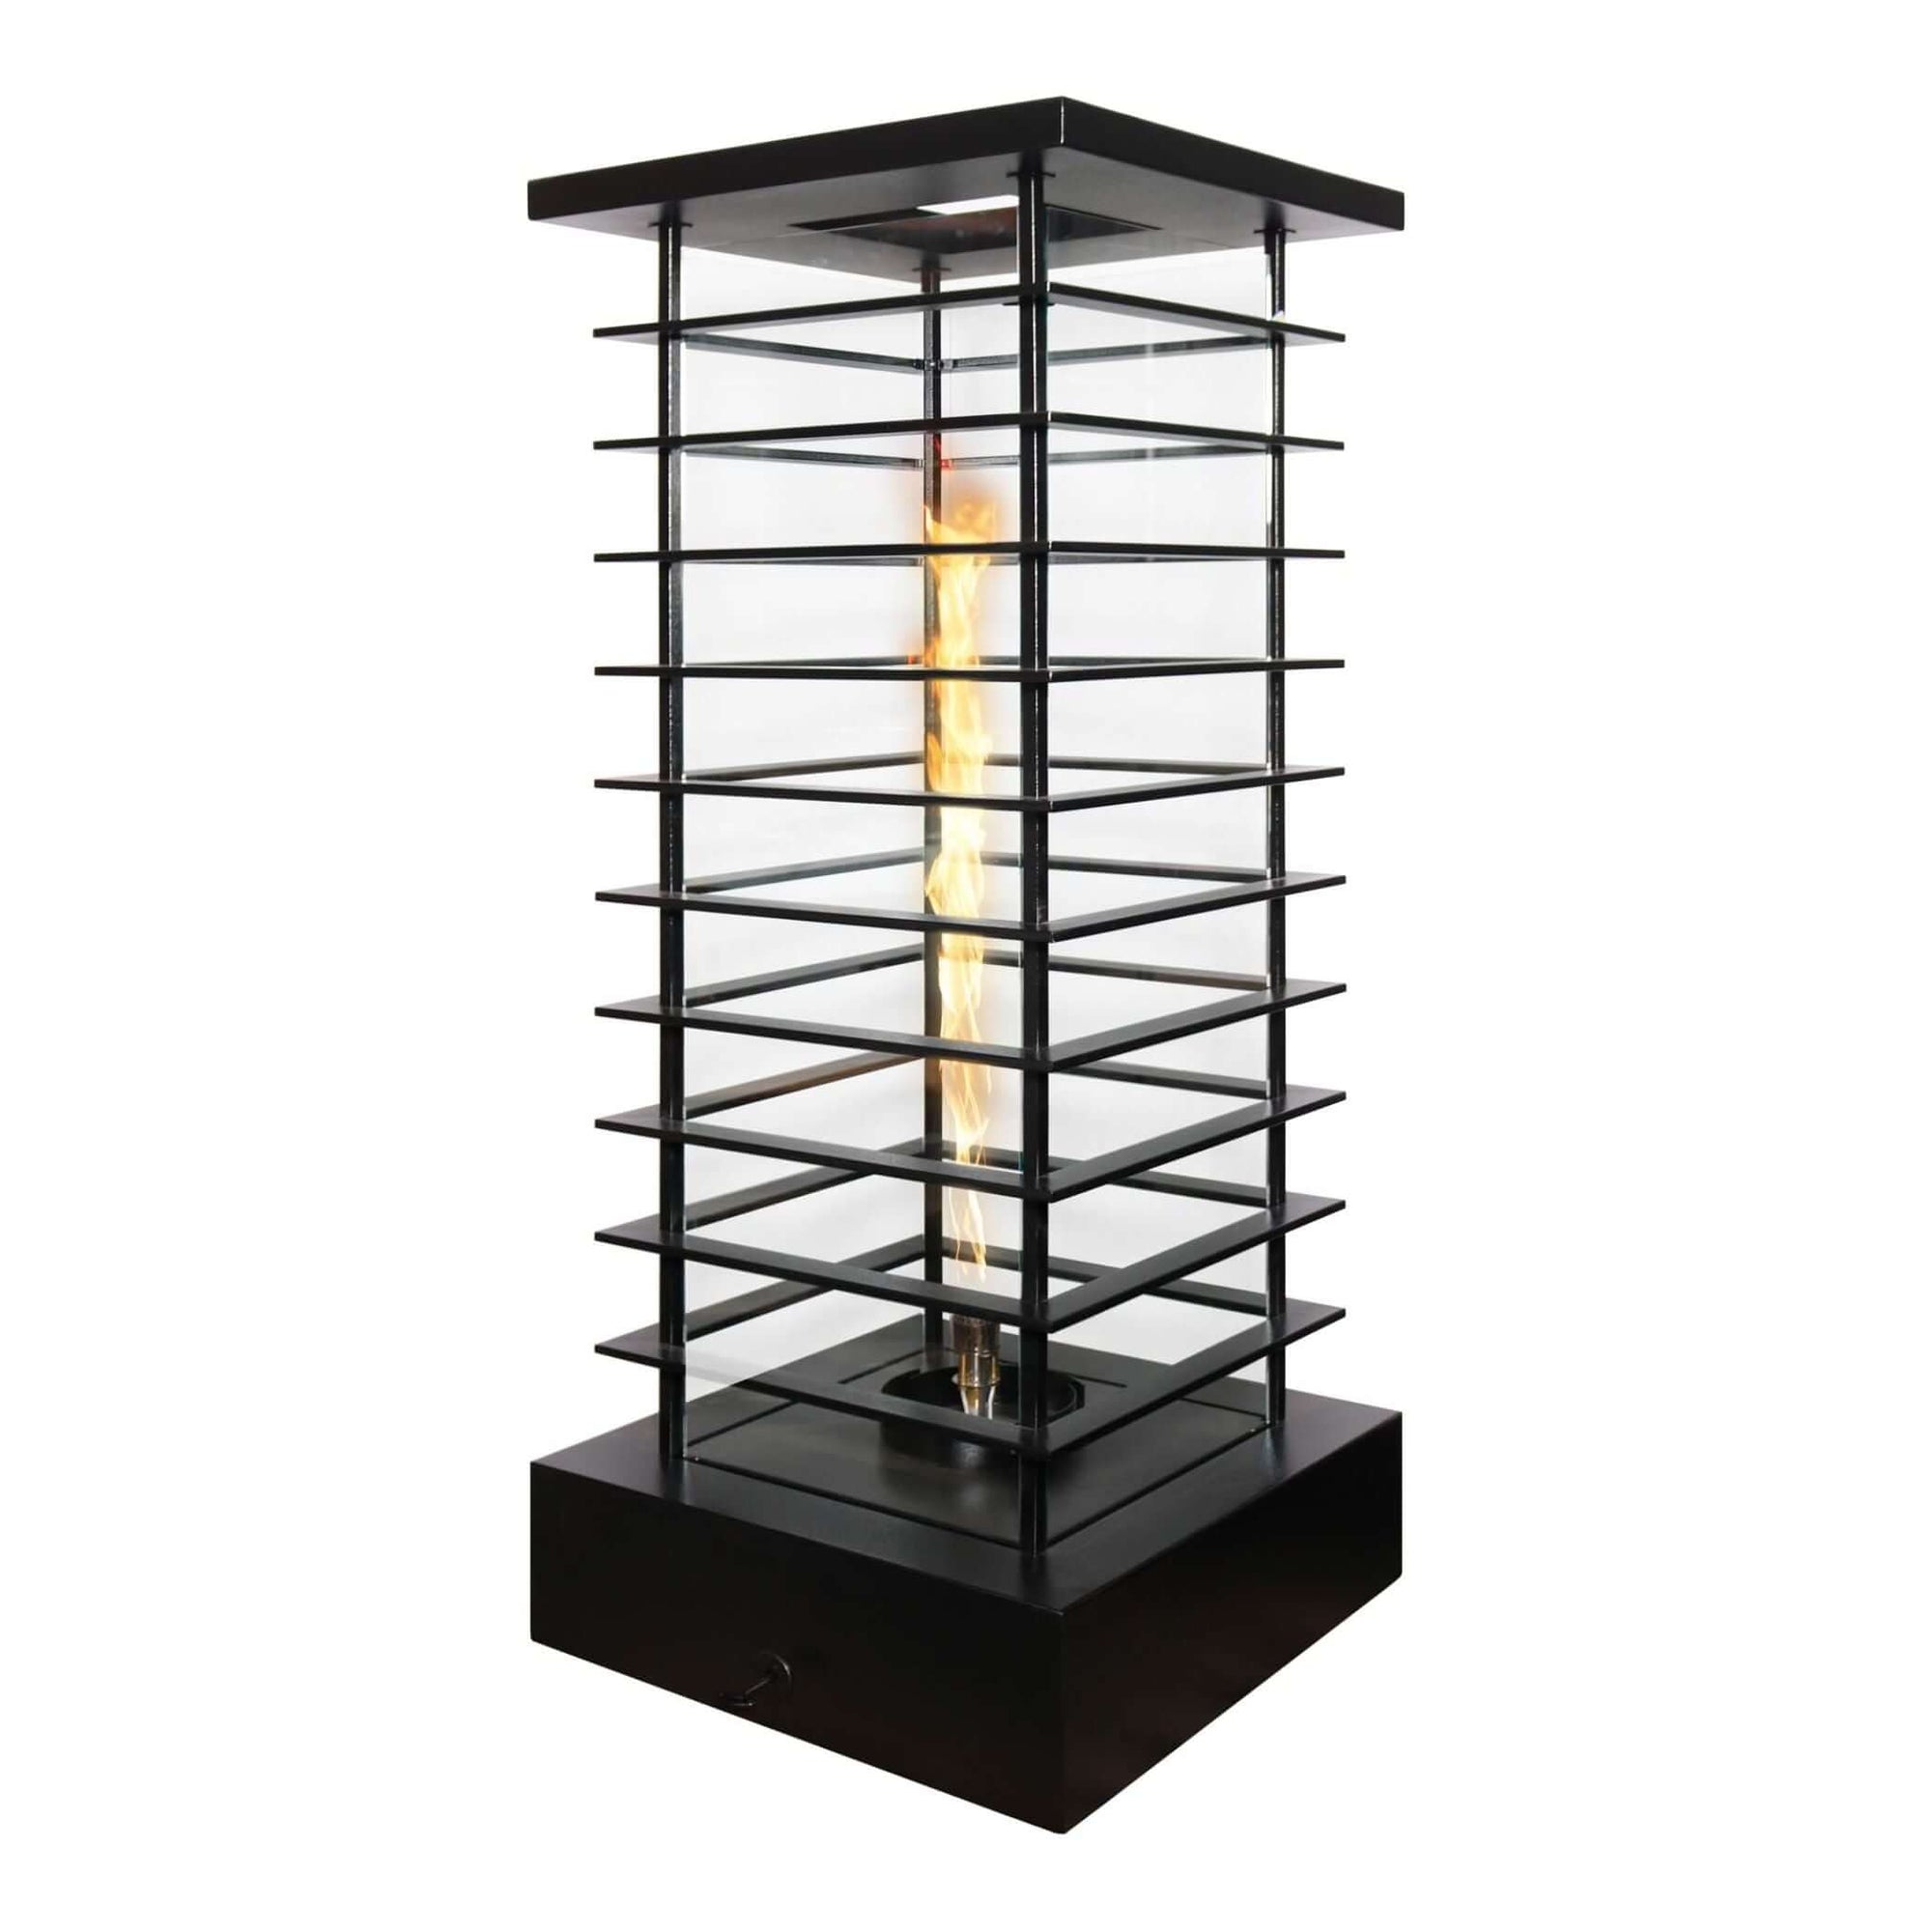 The Outdoor Plus Square High-Rise Fire Tower - Powder Coated Metal-Match Lit